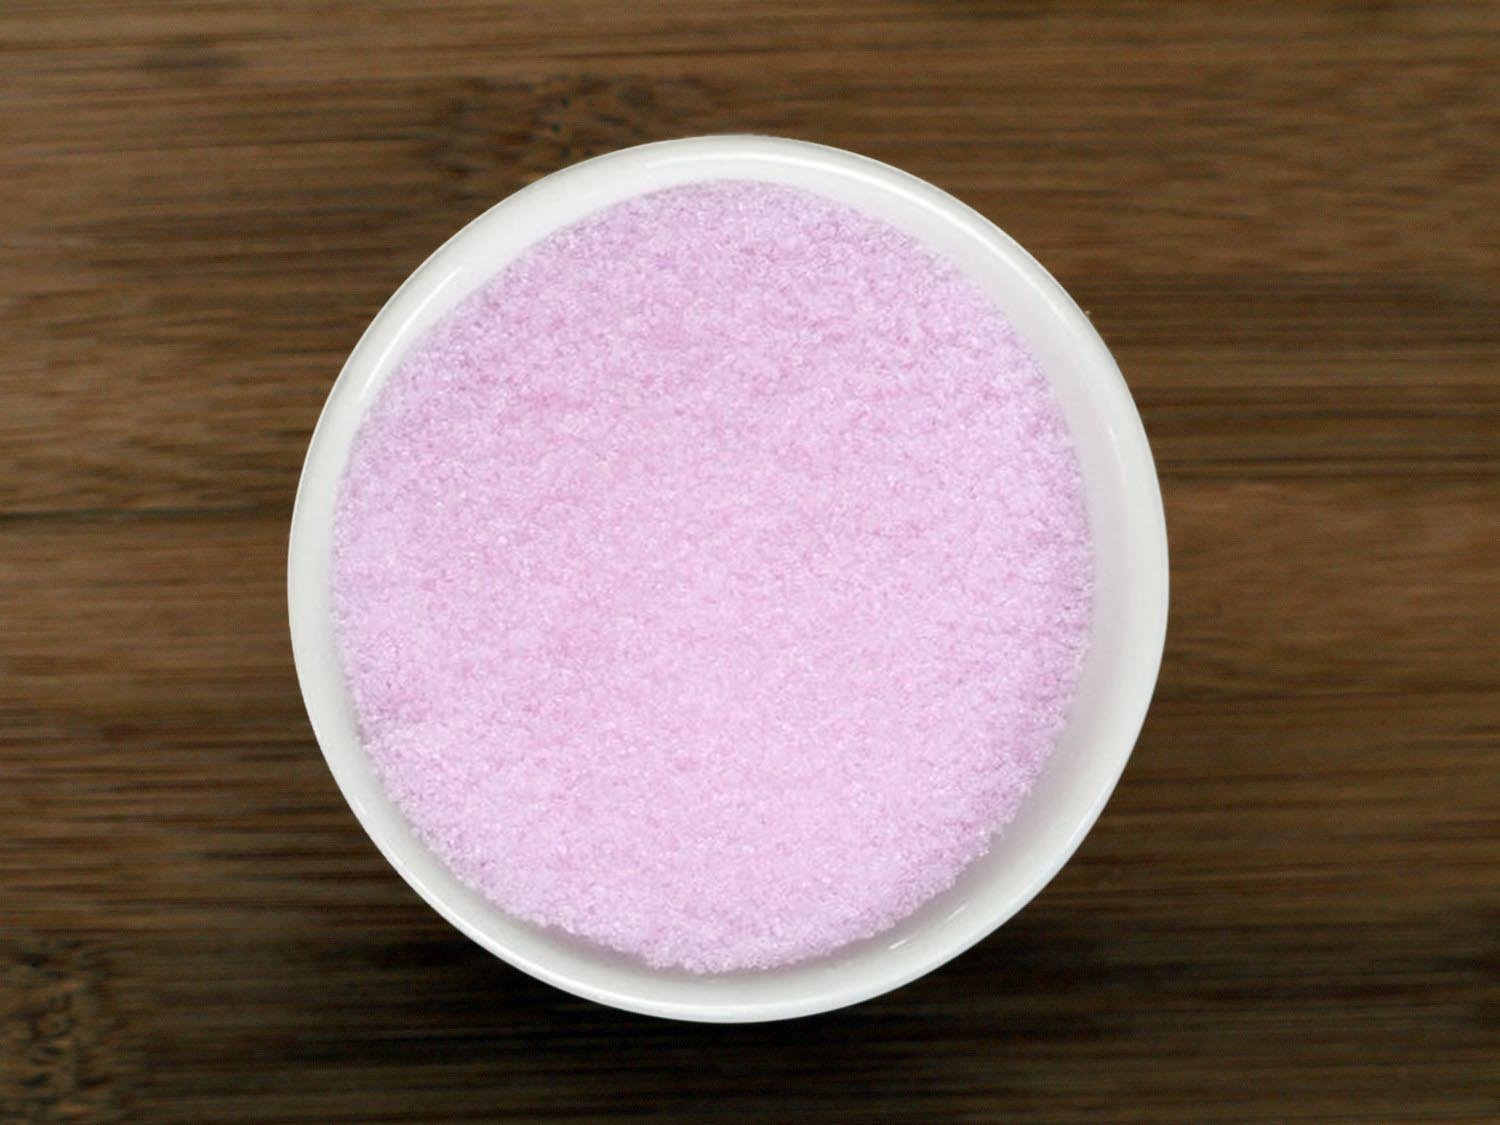 This is an image of a small white bowl containing Premium Pink Curing Salt from Anthony's Goods